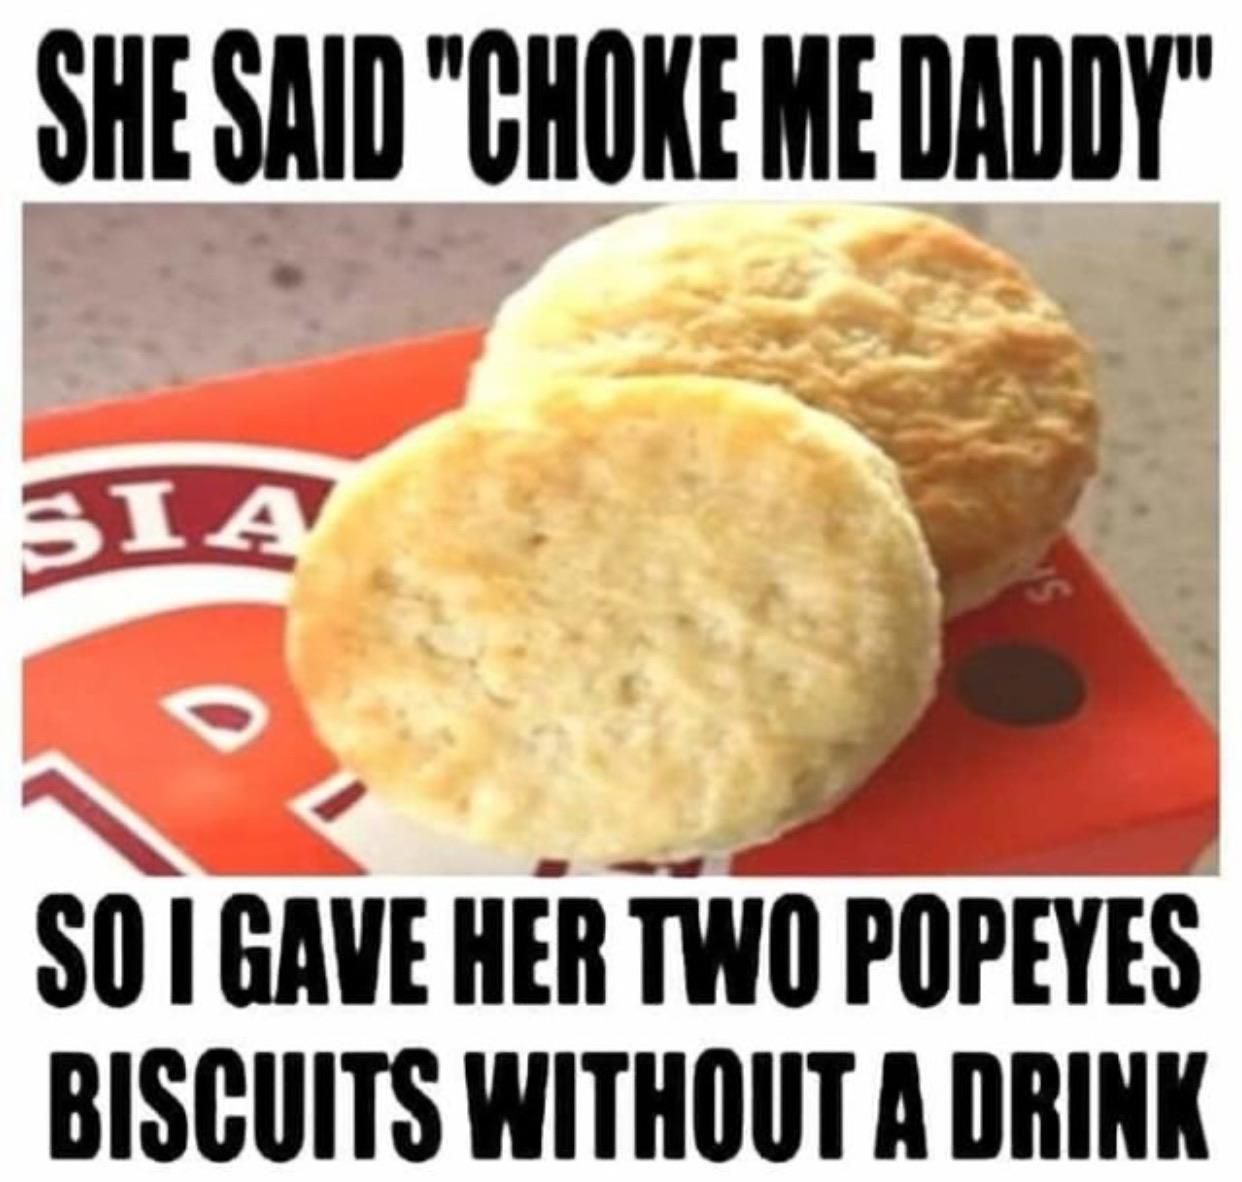 It would only take one KFC biscuit to accomplish this.